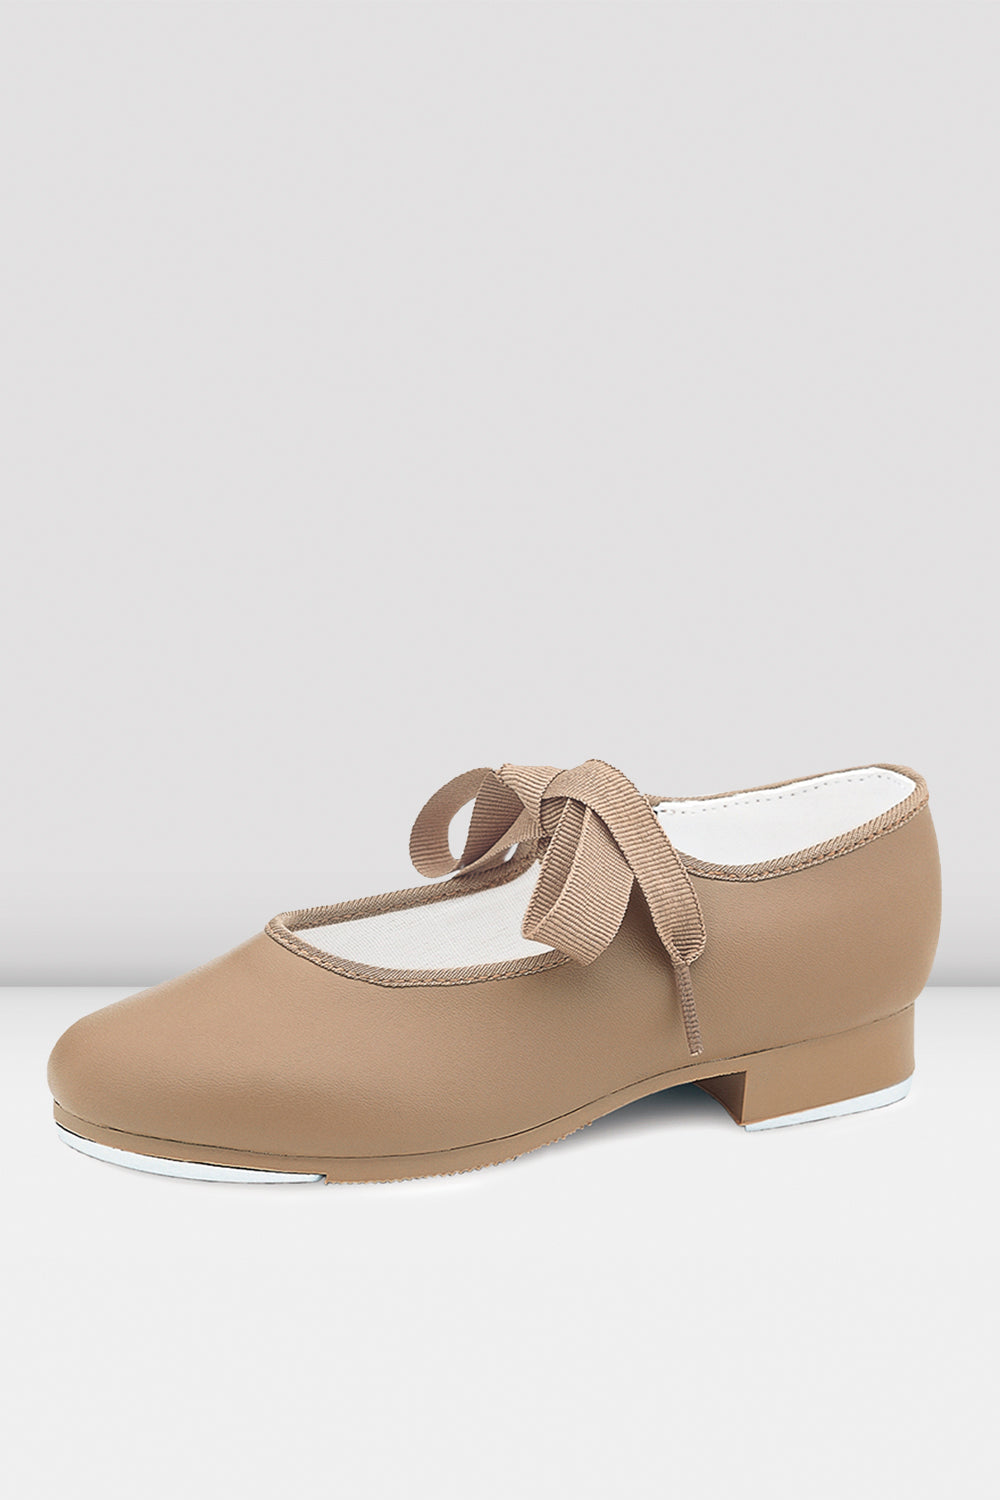 Girls Dance Now Student Tap Shoes, Tan 